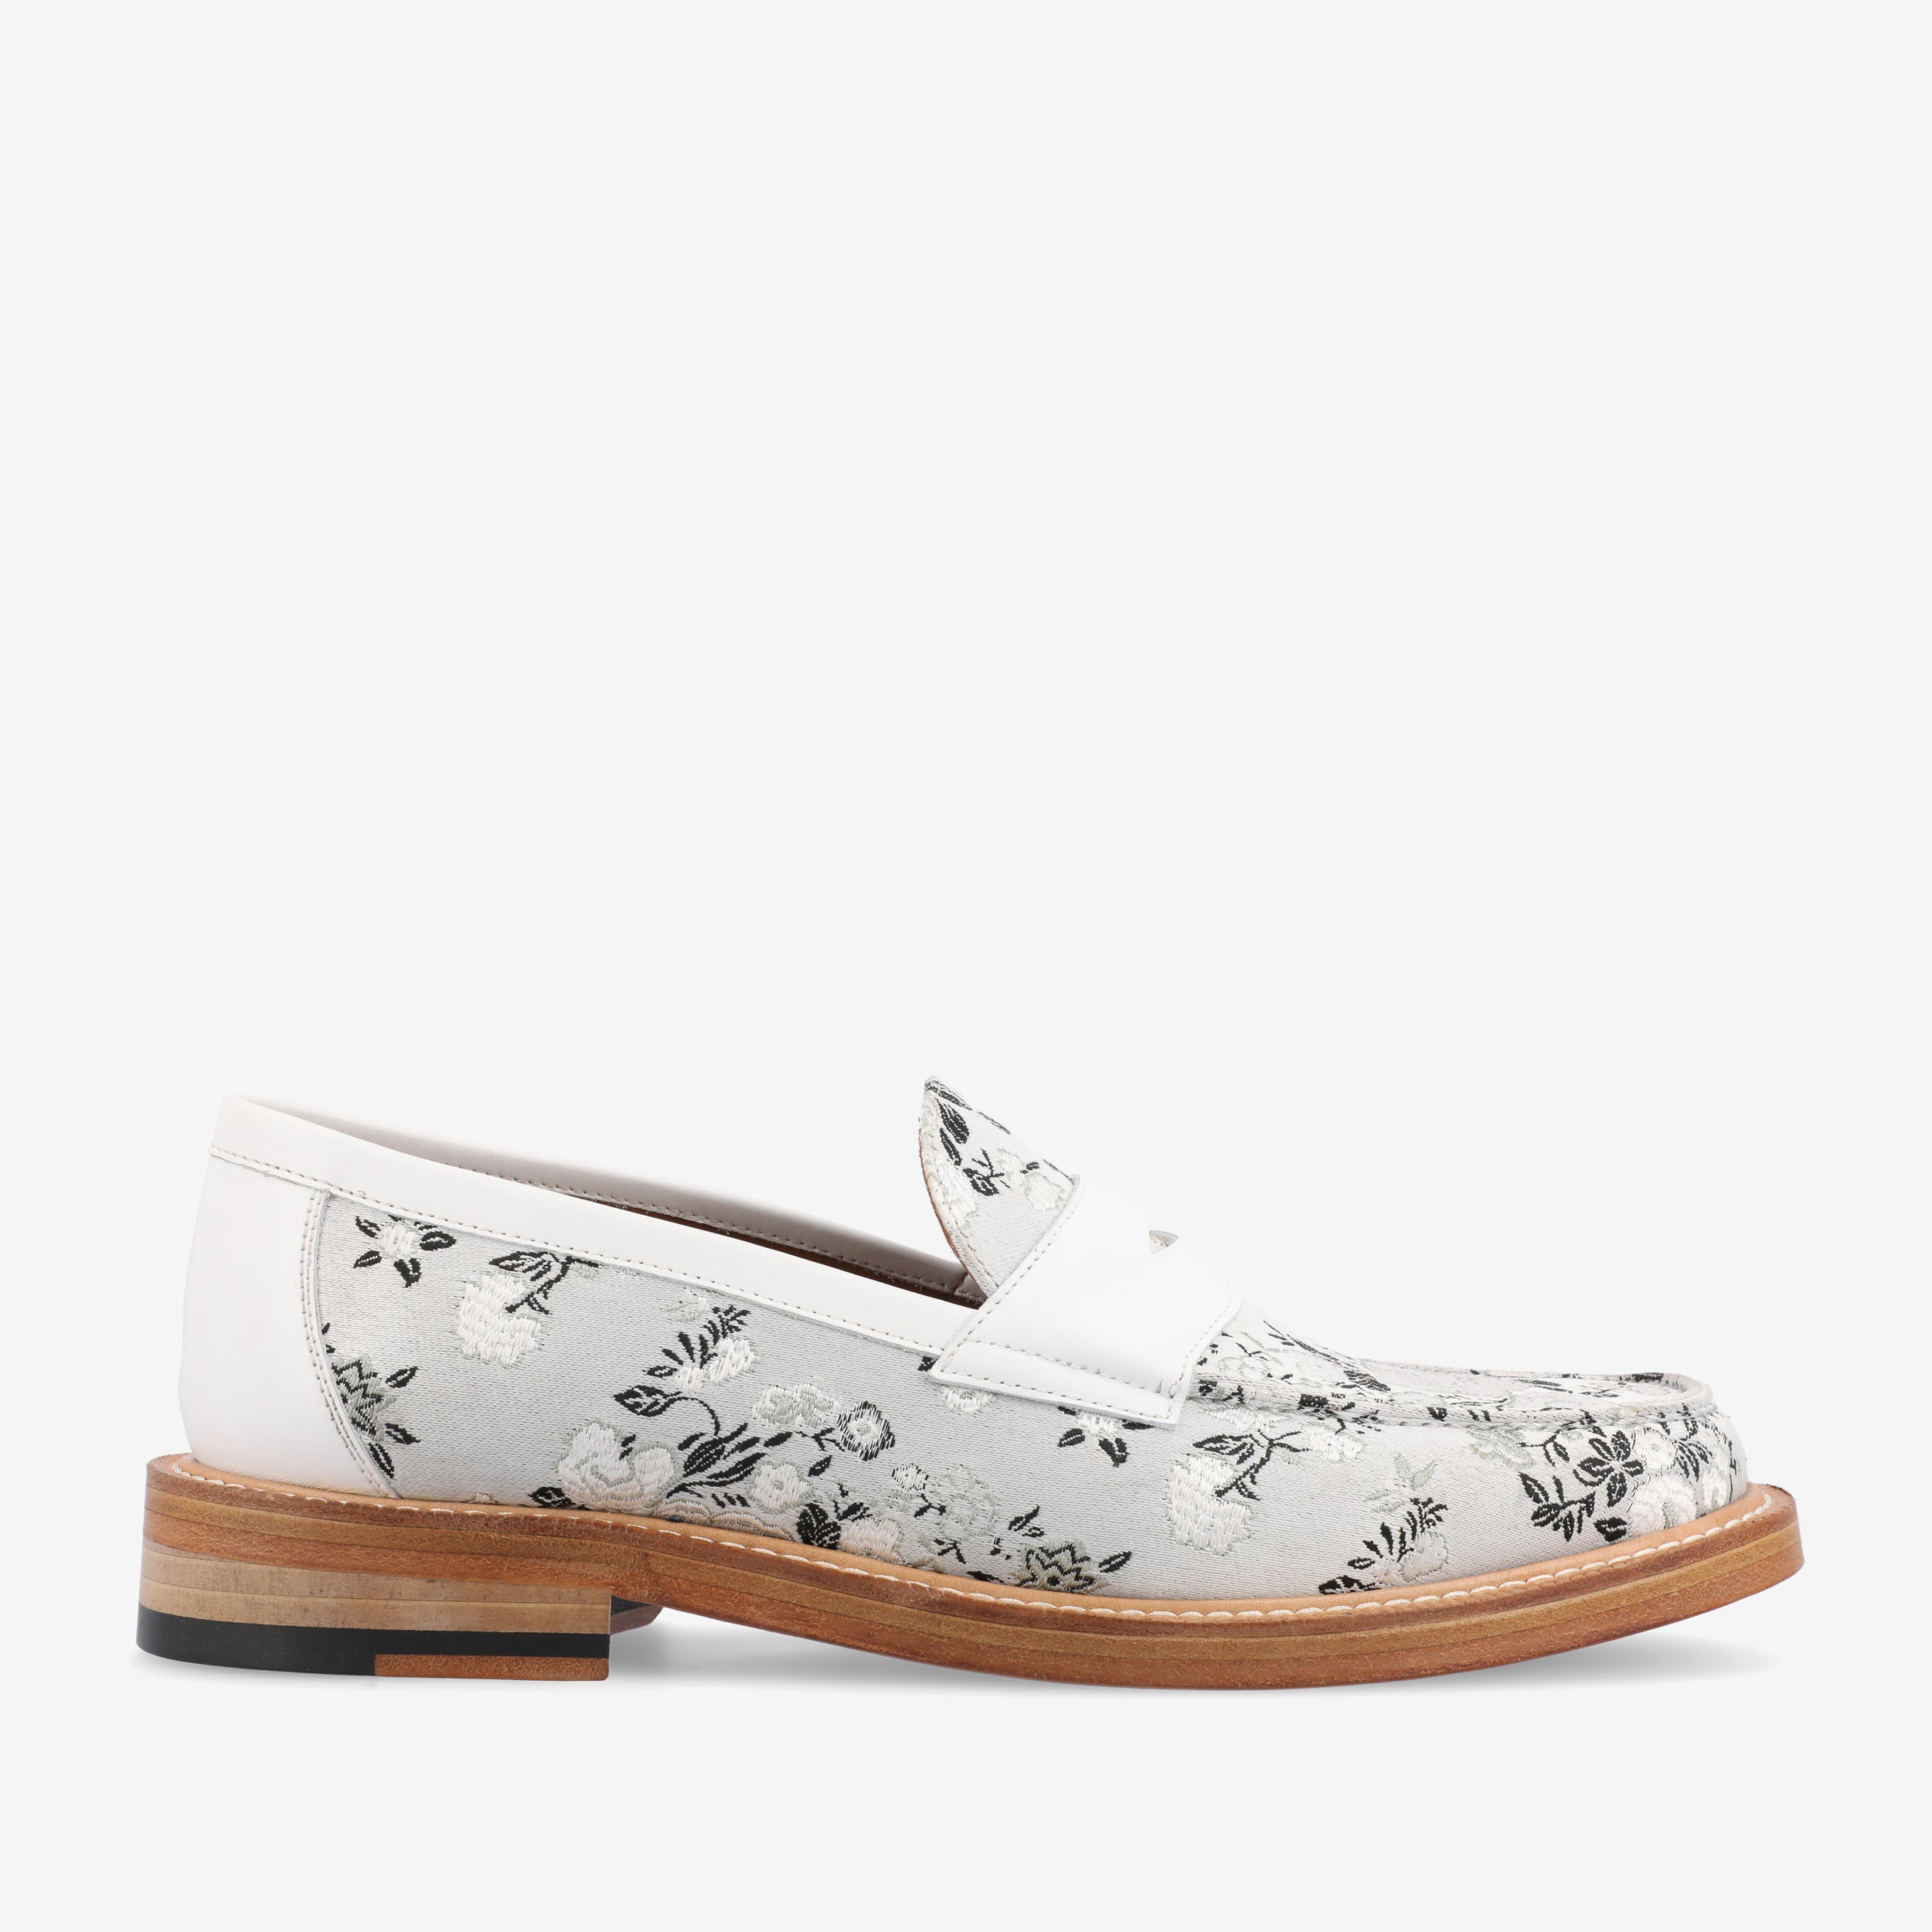 The Fitz Loafer in Floral Size 13 by Taft